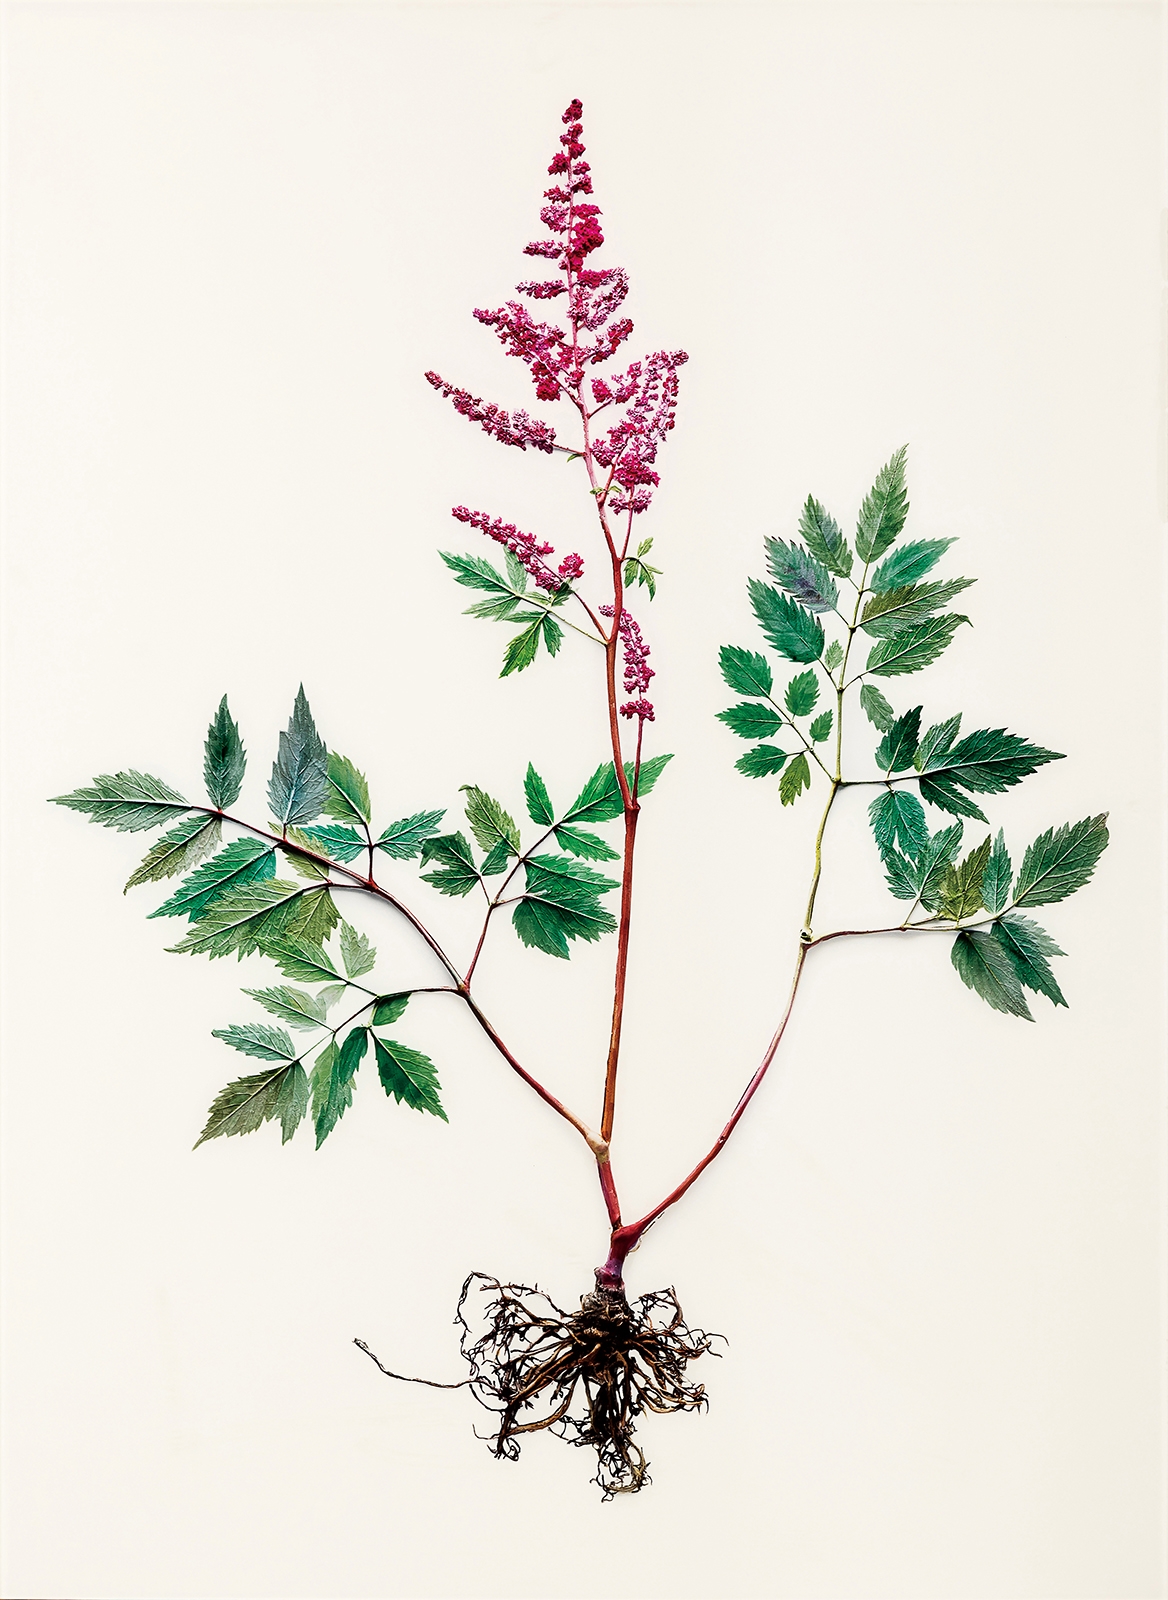 Photogenic Drawing - Astilbe Chinensis by Koo Sung Soo, 2011